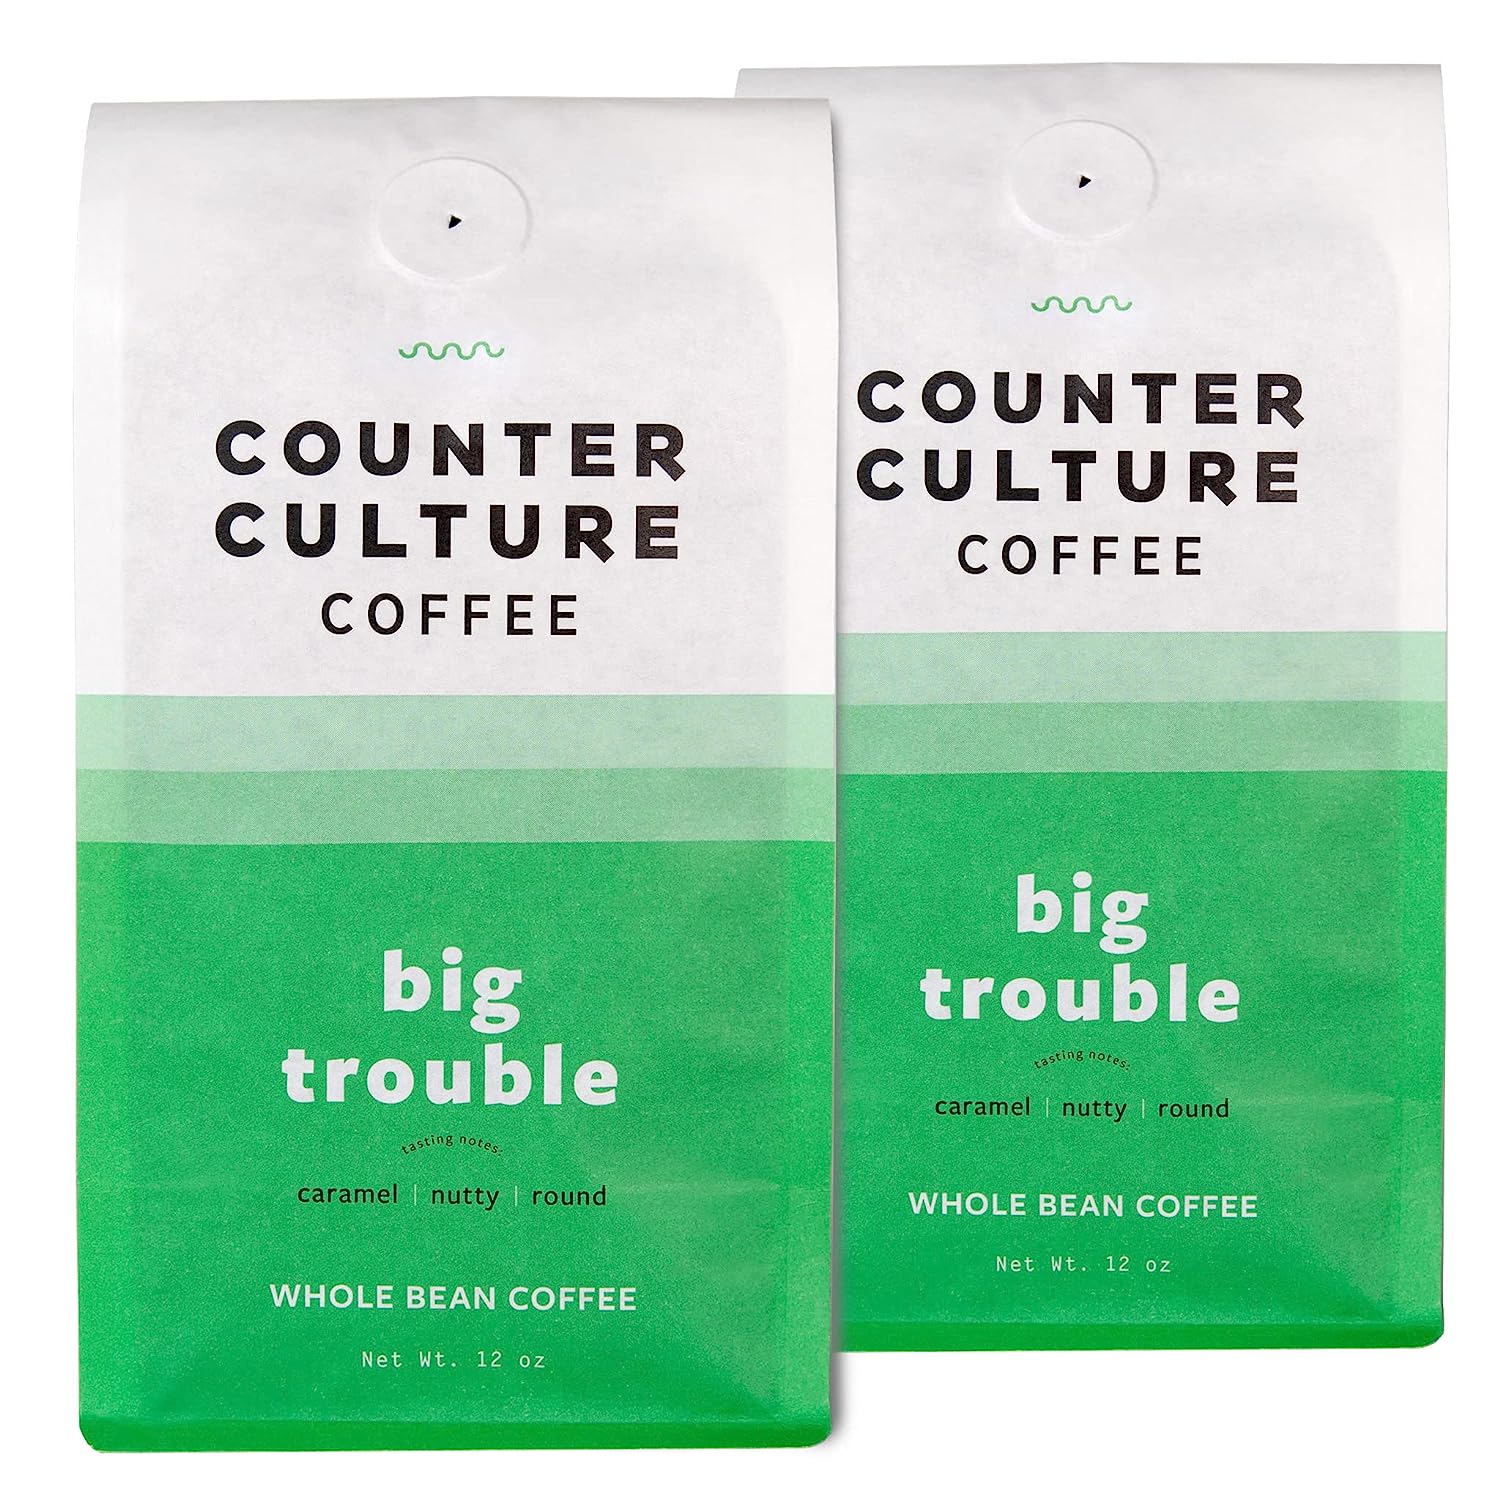 Counter Culture Coffee Big Trouble x 2 - Medium Roast, Sustainably Farmed, Kosher, Whole Bean Coffee, (2 Bags)